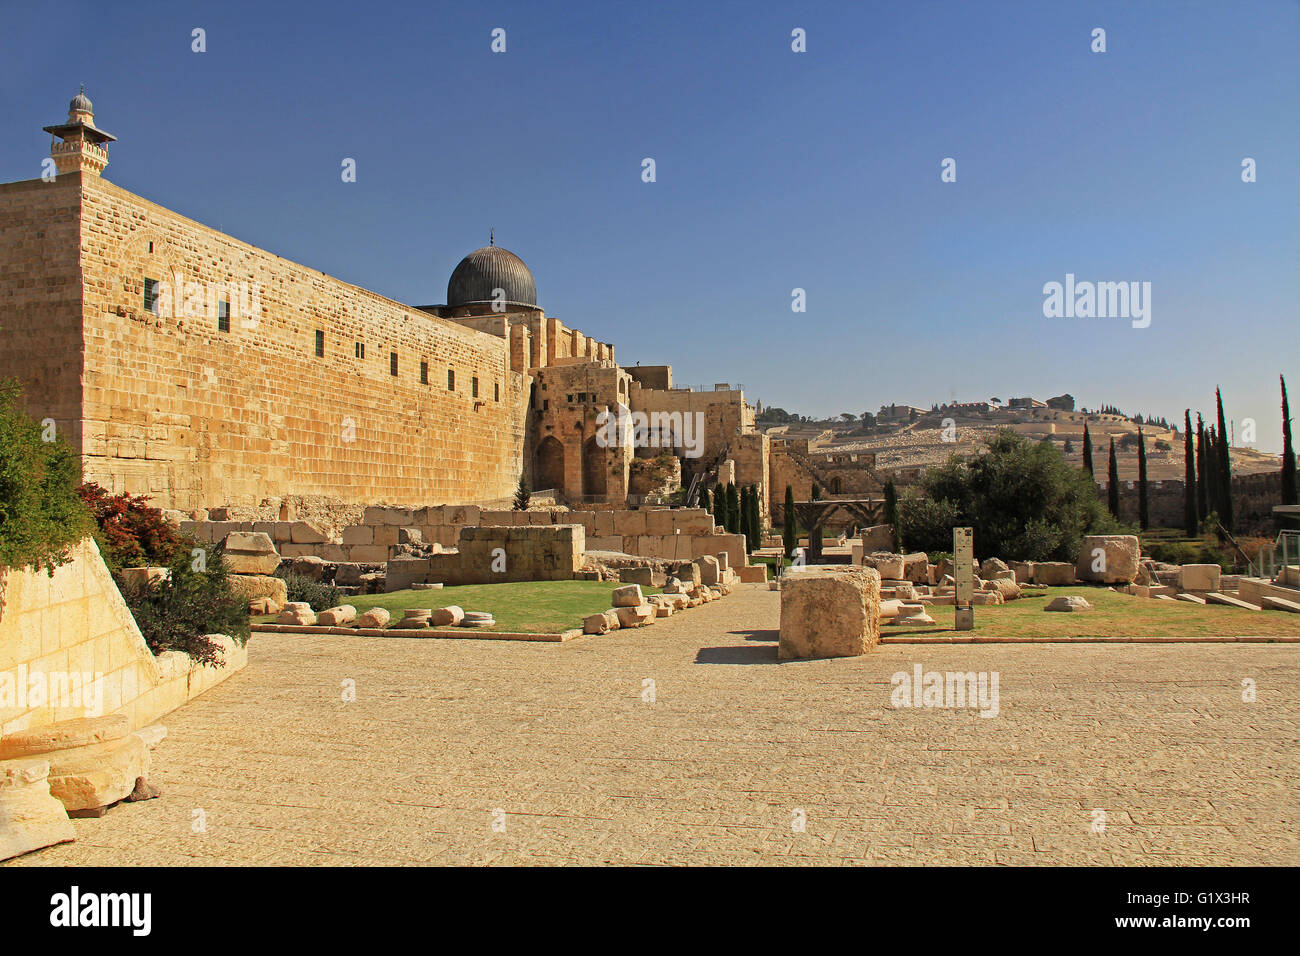 Al-Aqsa mosque is located on the south side of the temple mount in Jerusalem, Israel, and is the 3rd holiest site in Islam. Stock Photo